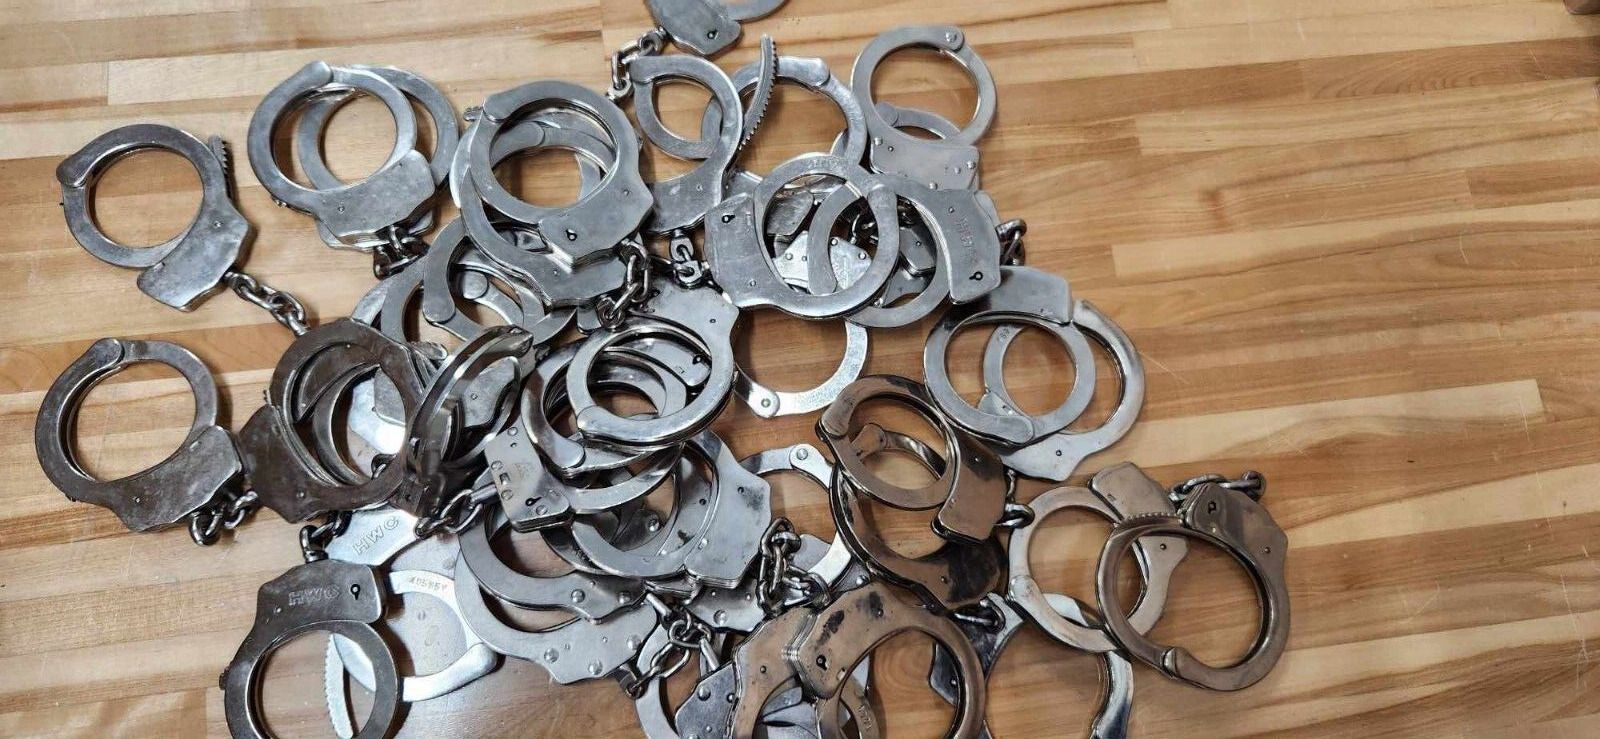 BULK LOT of 22: Pre Owned Police Handcuffs - Mix Brands - NO KEYS